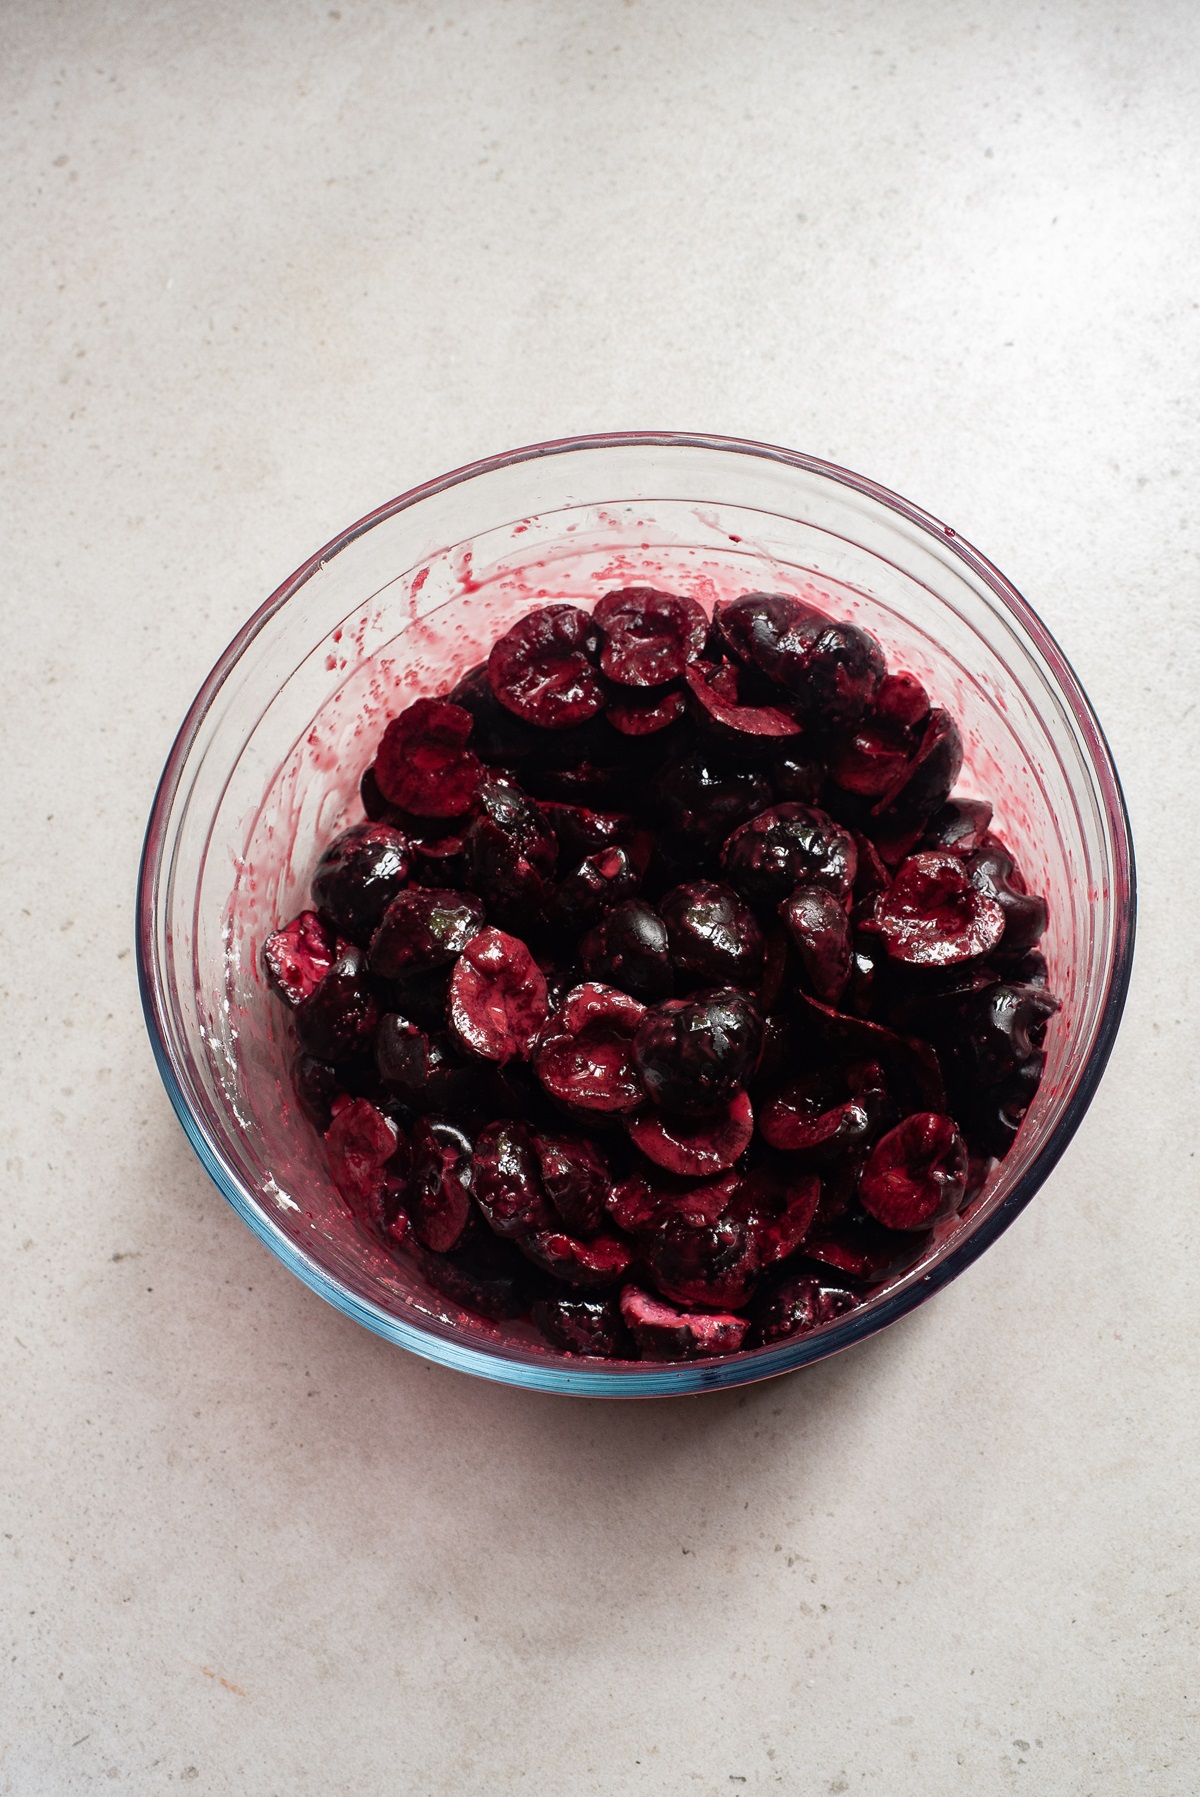 Cherry mixture in a clear glass bowl.